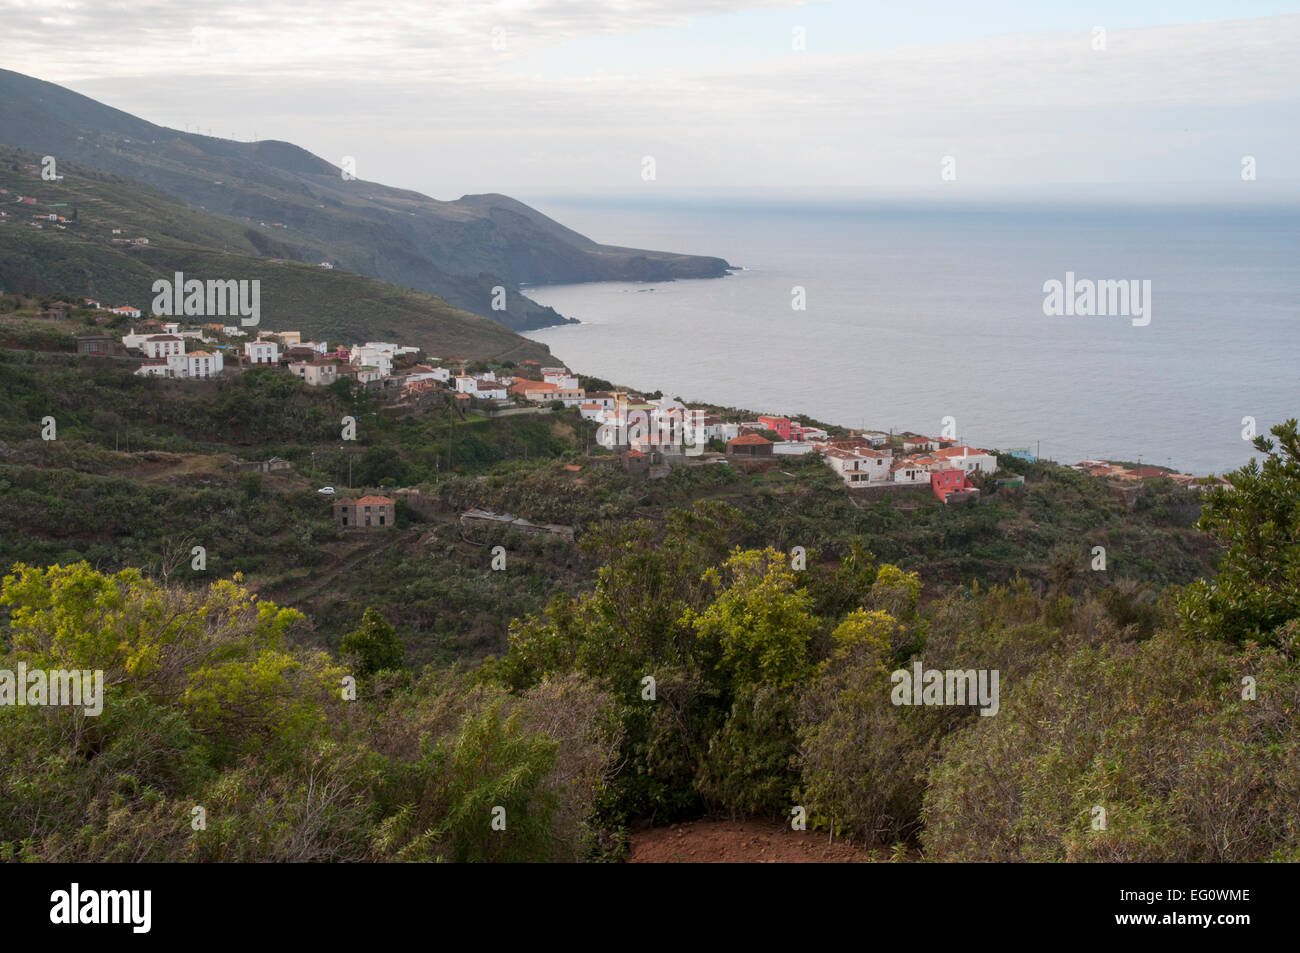 Gallegos is a village sitting on the slopes of an ancient volcano in the north of La Palma in the Canary Islands. Stock Photo